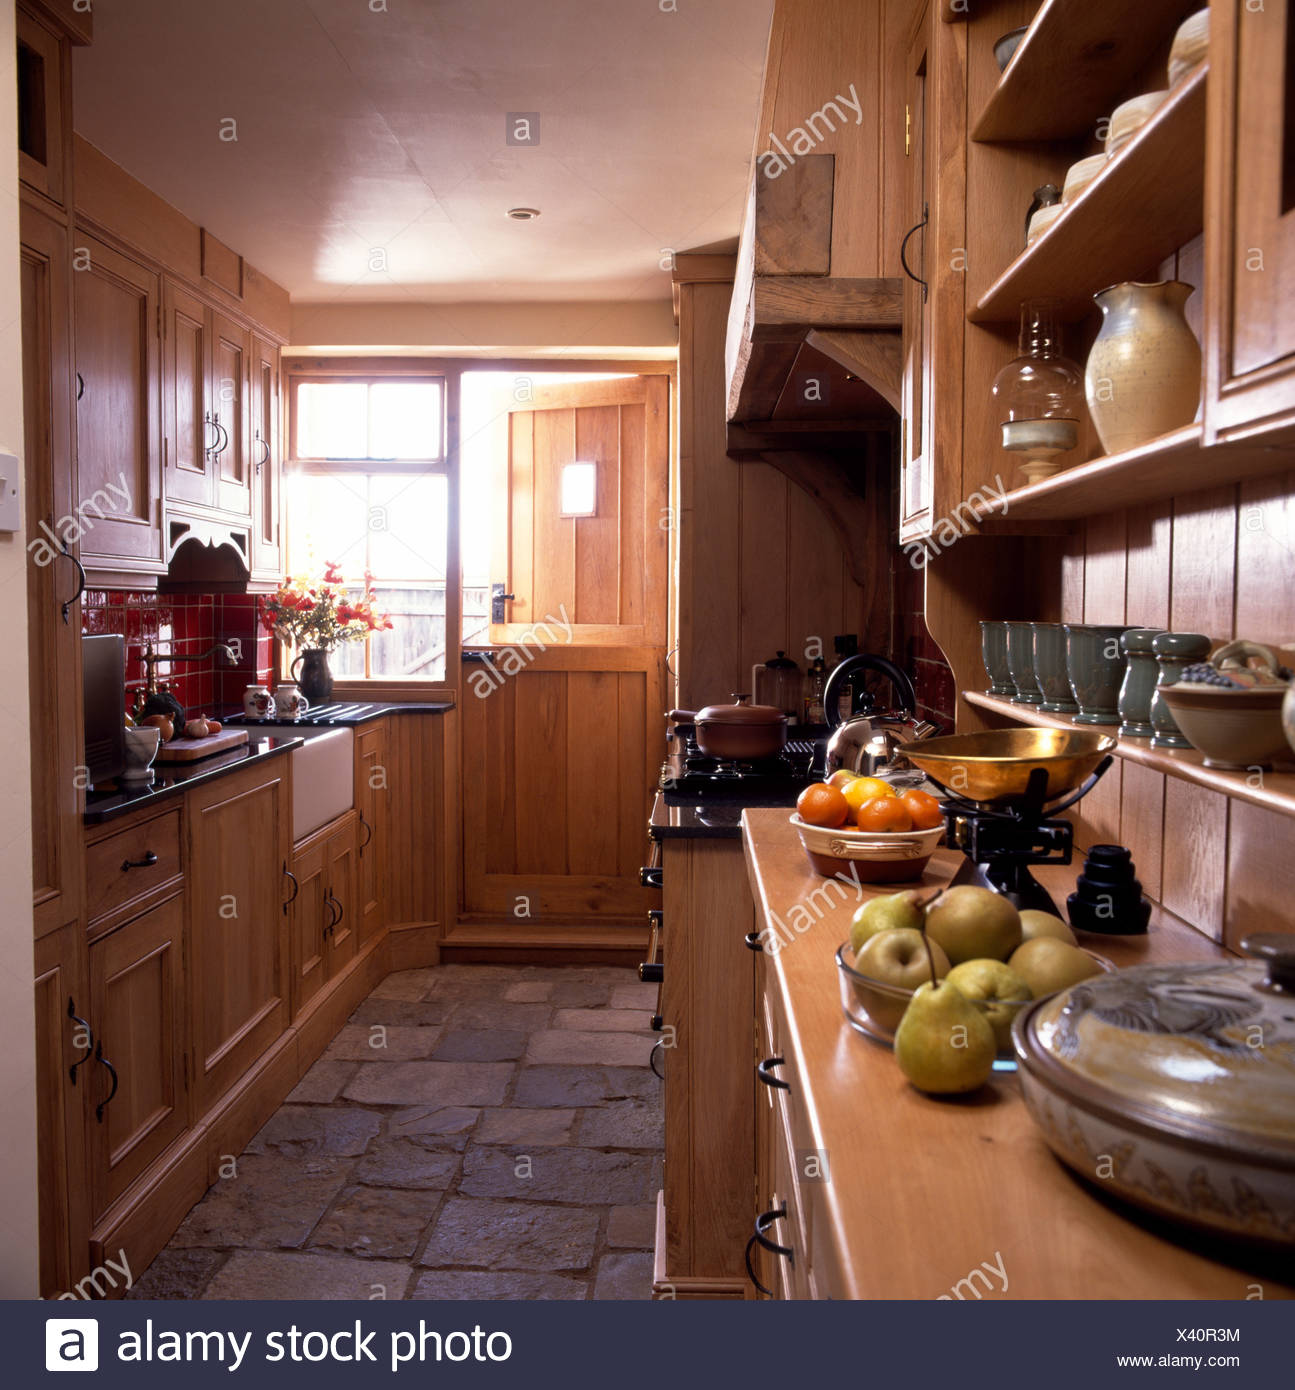 Stone Floor Tiles In Narrow Country Kitchen With Fitted Wooden